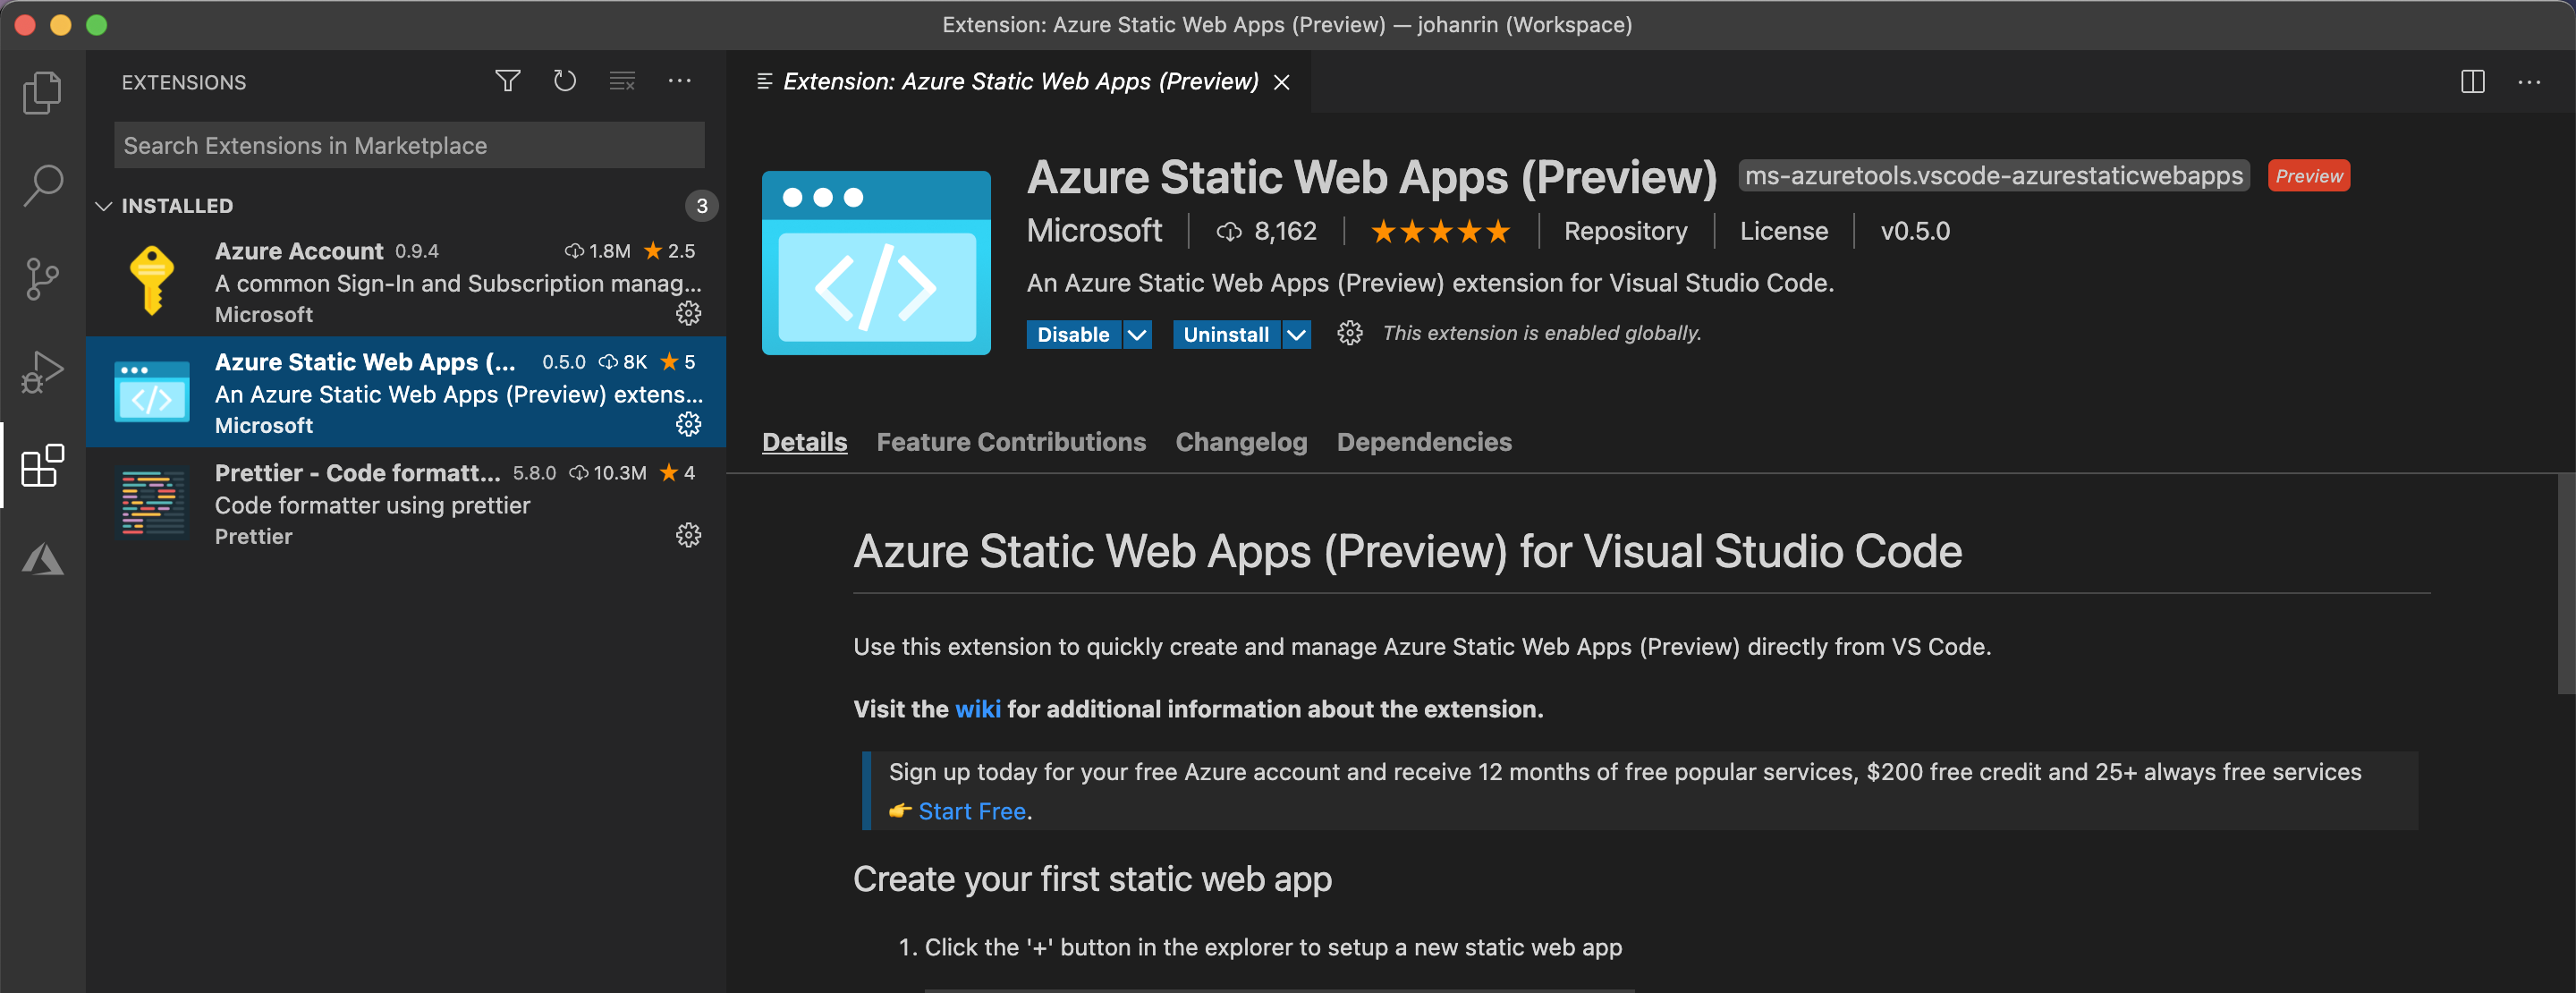 Azure Static Web Apps extension